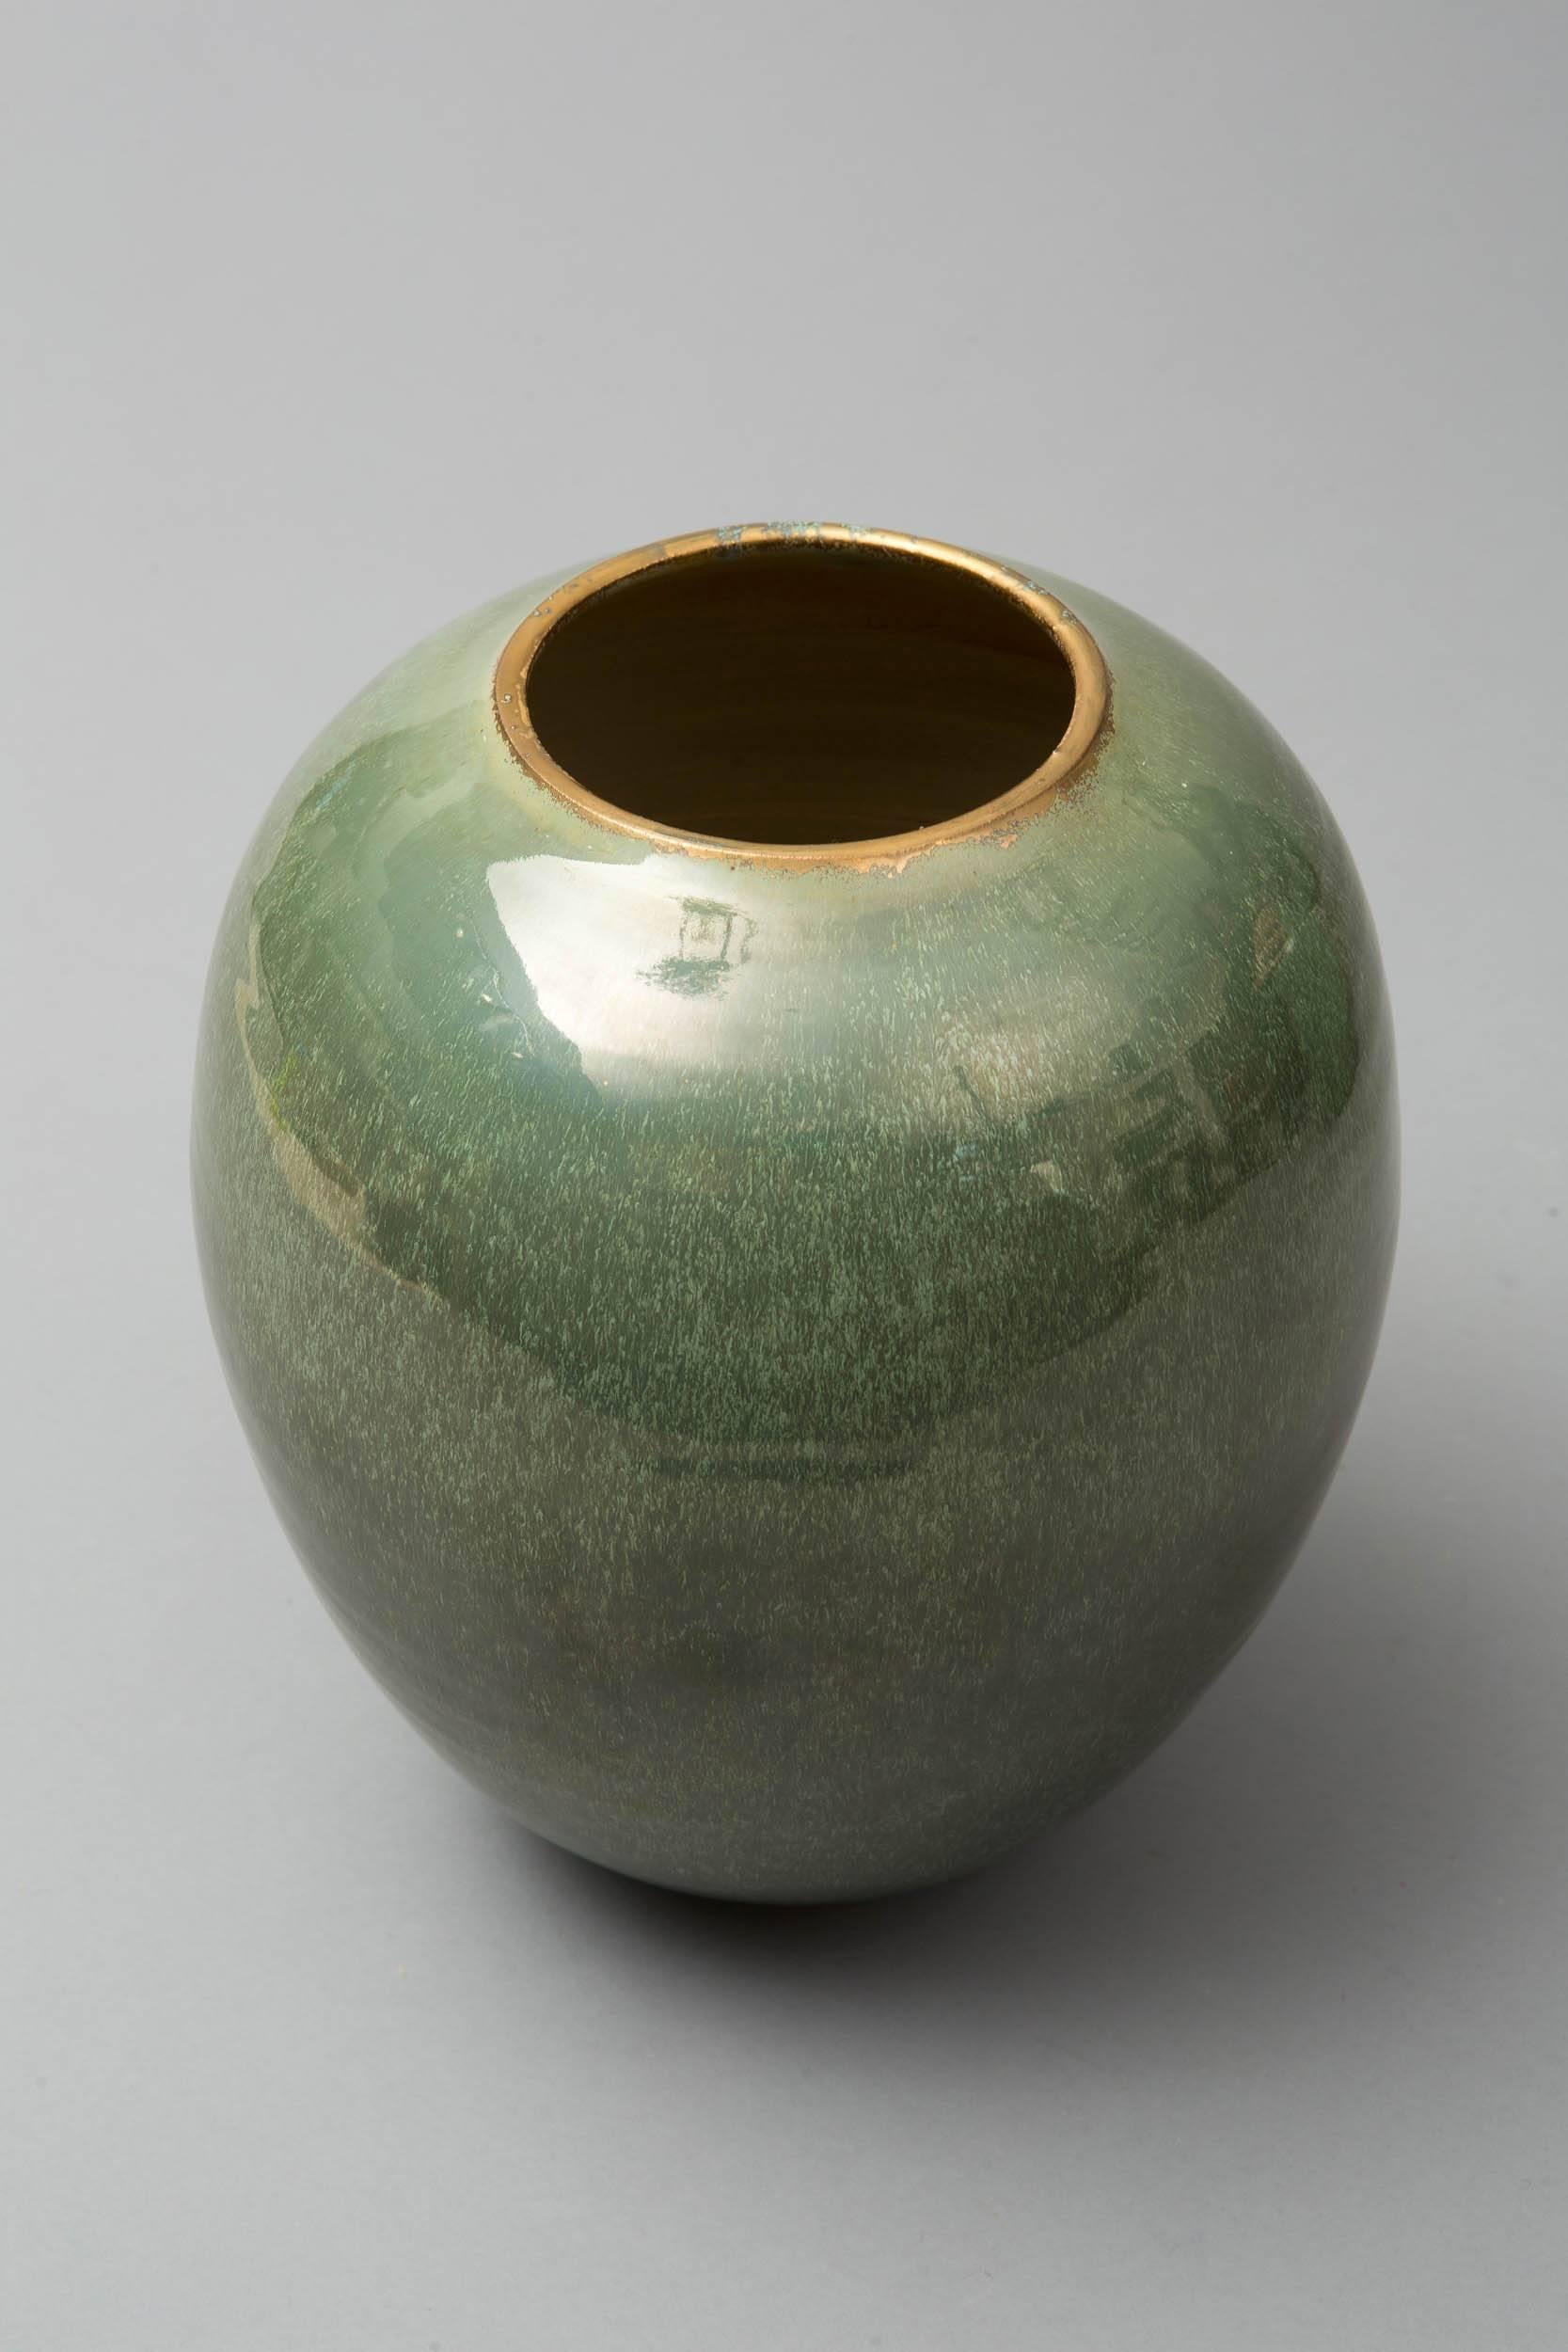 French Contemporary 2015 Green Celadon Vase, One of a Kind, Karen Swami